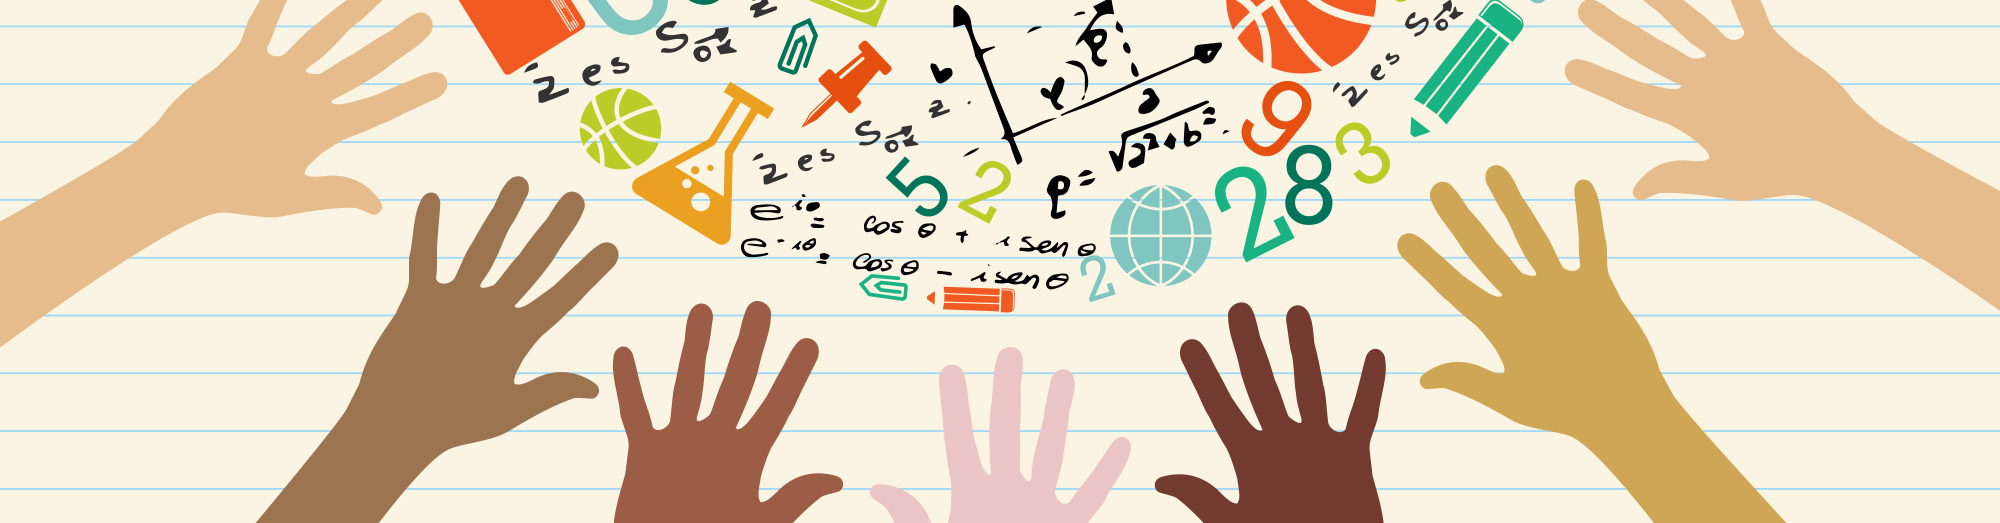 Drawing of student hands reaching for knowledge